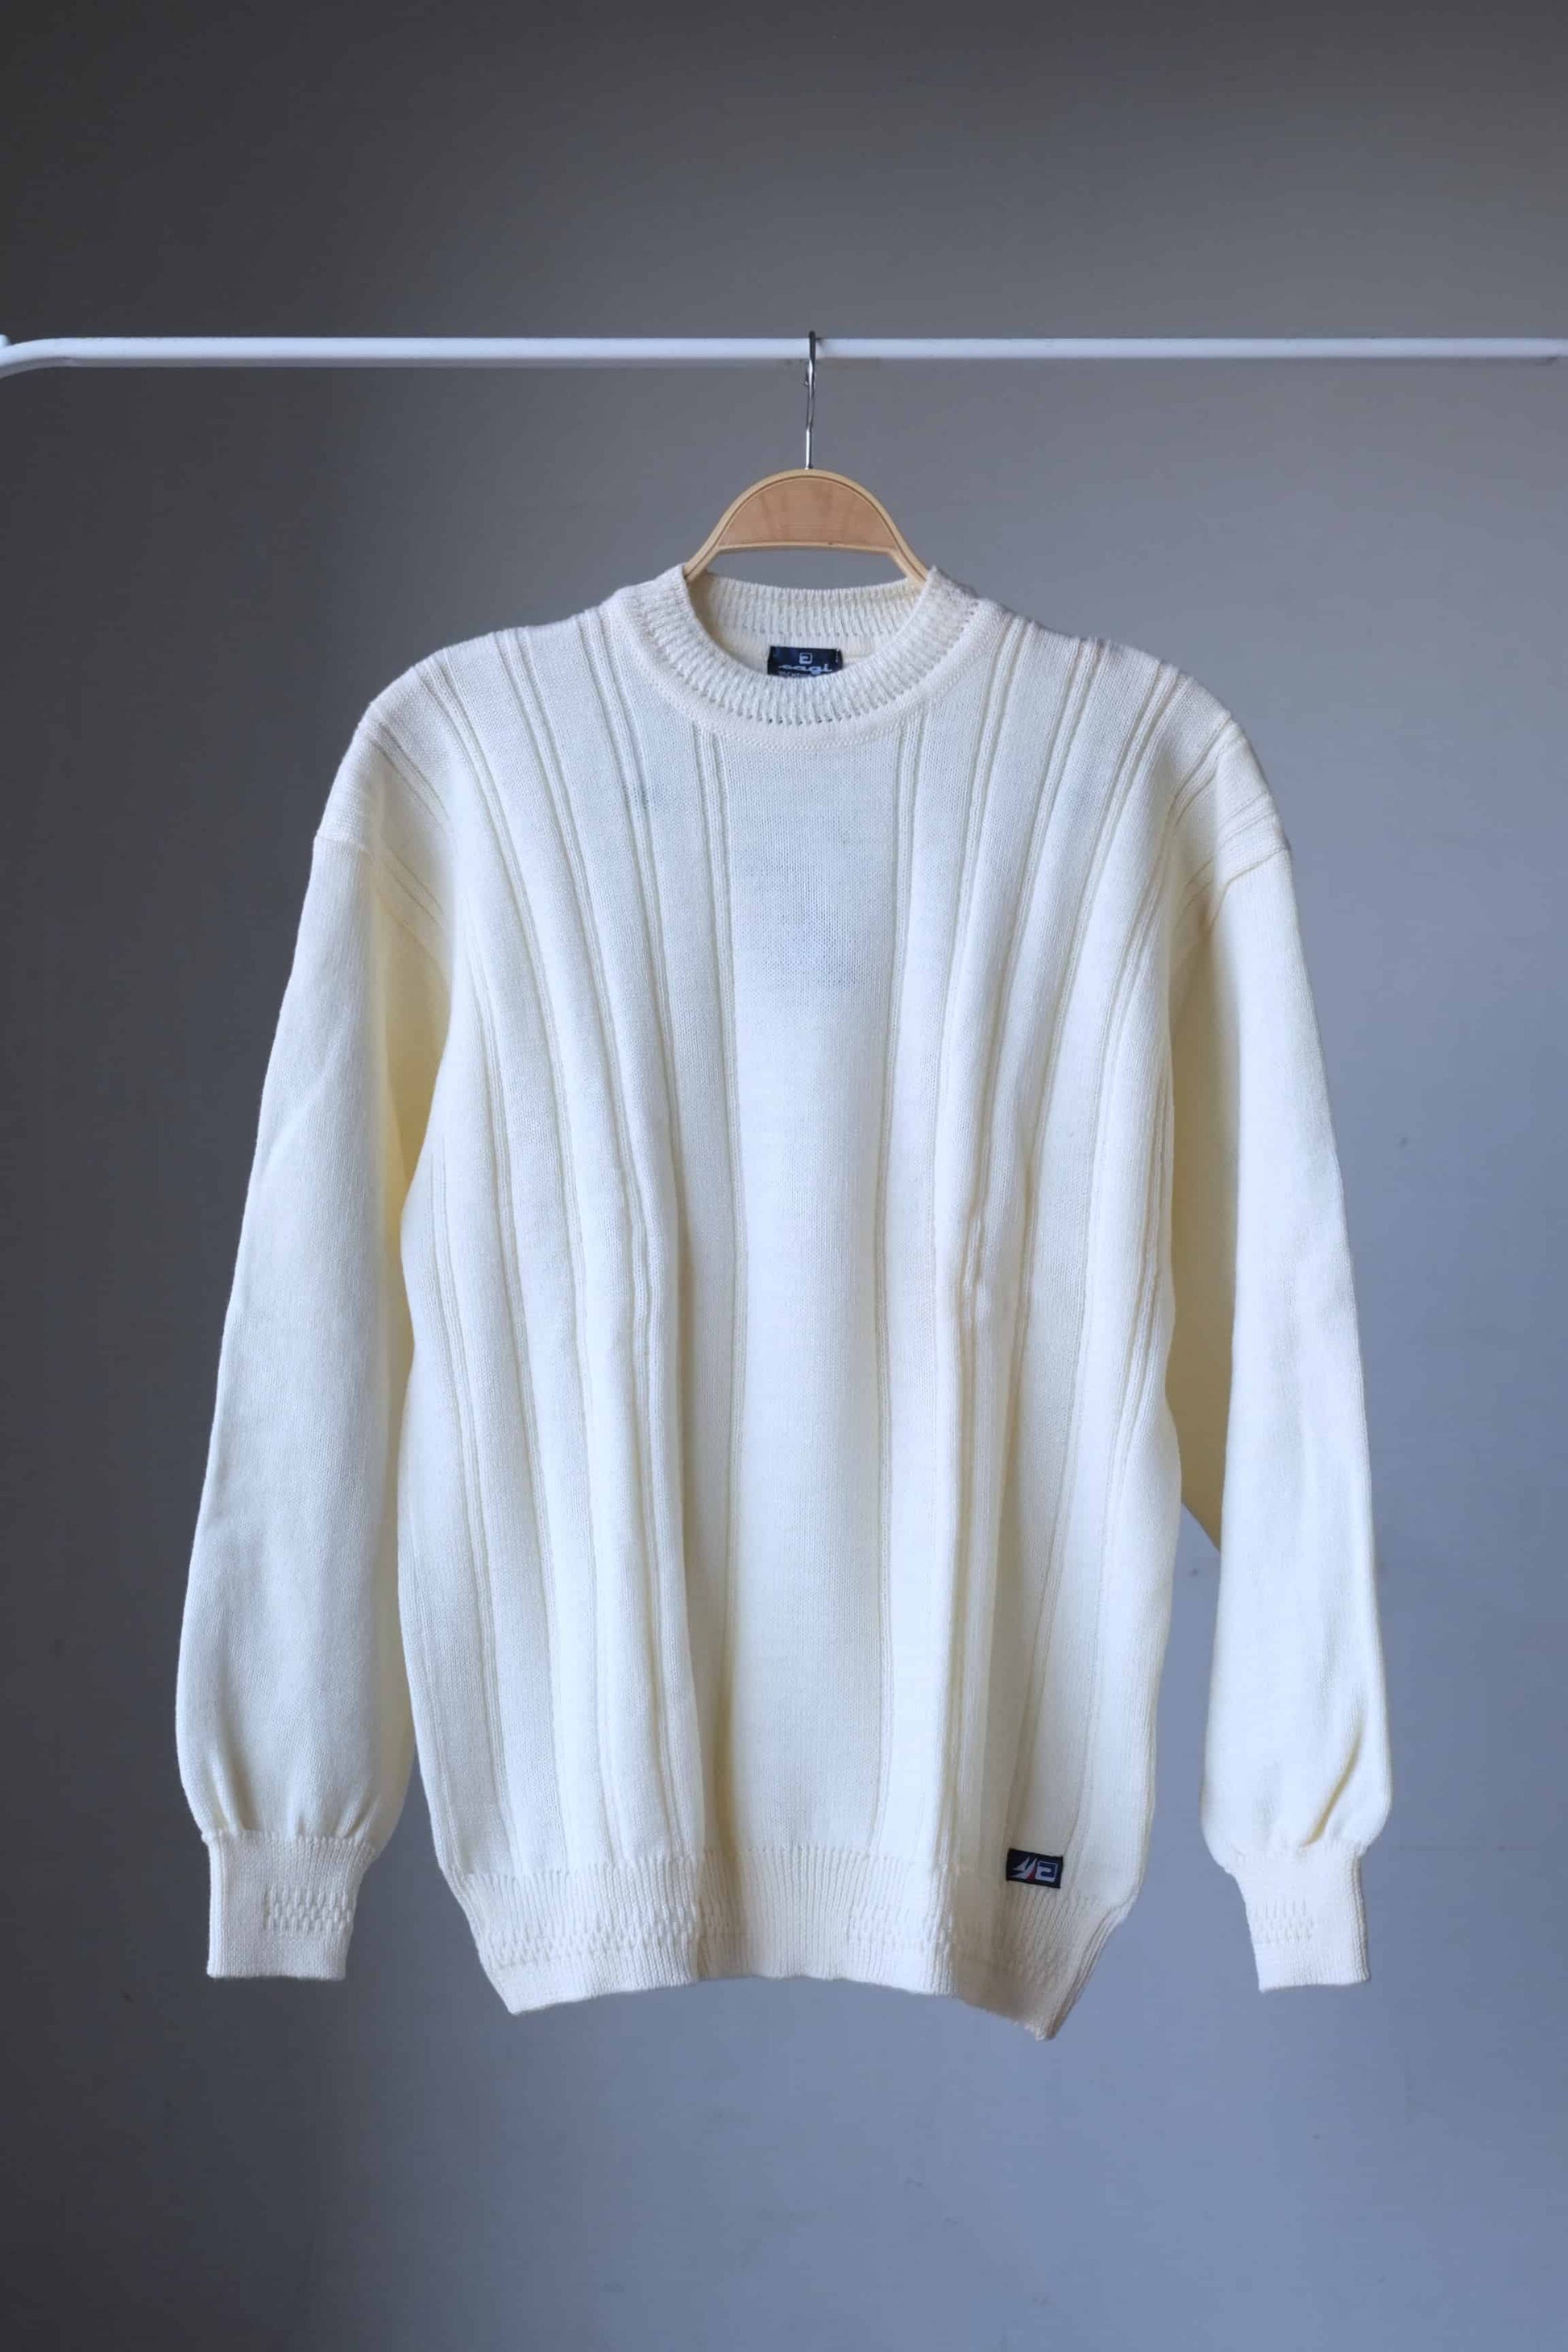 90's Cable Knit Sweater white